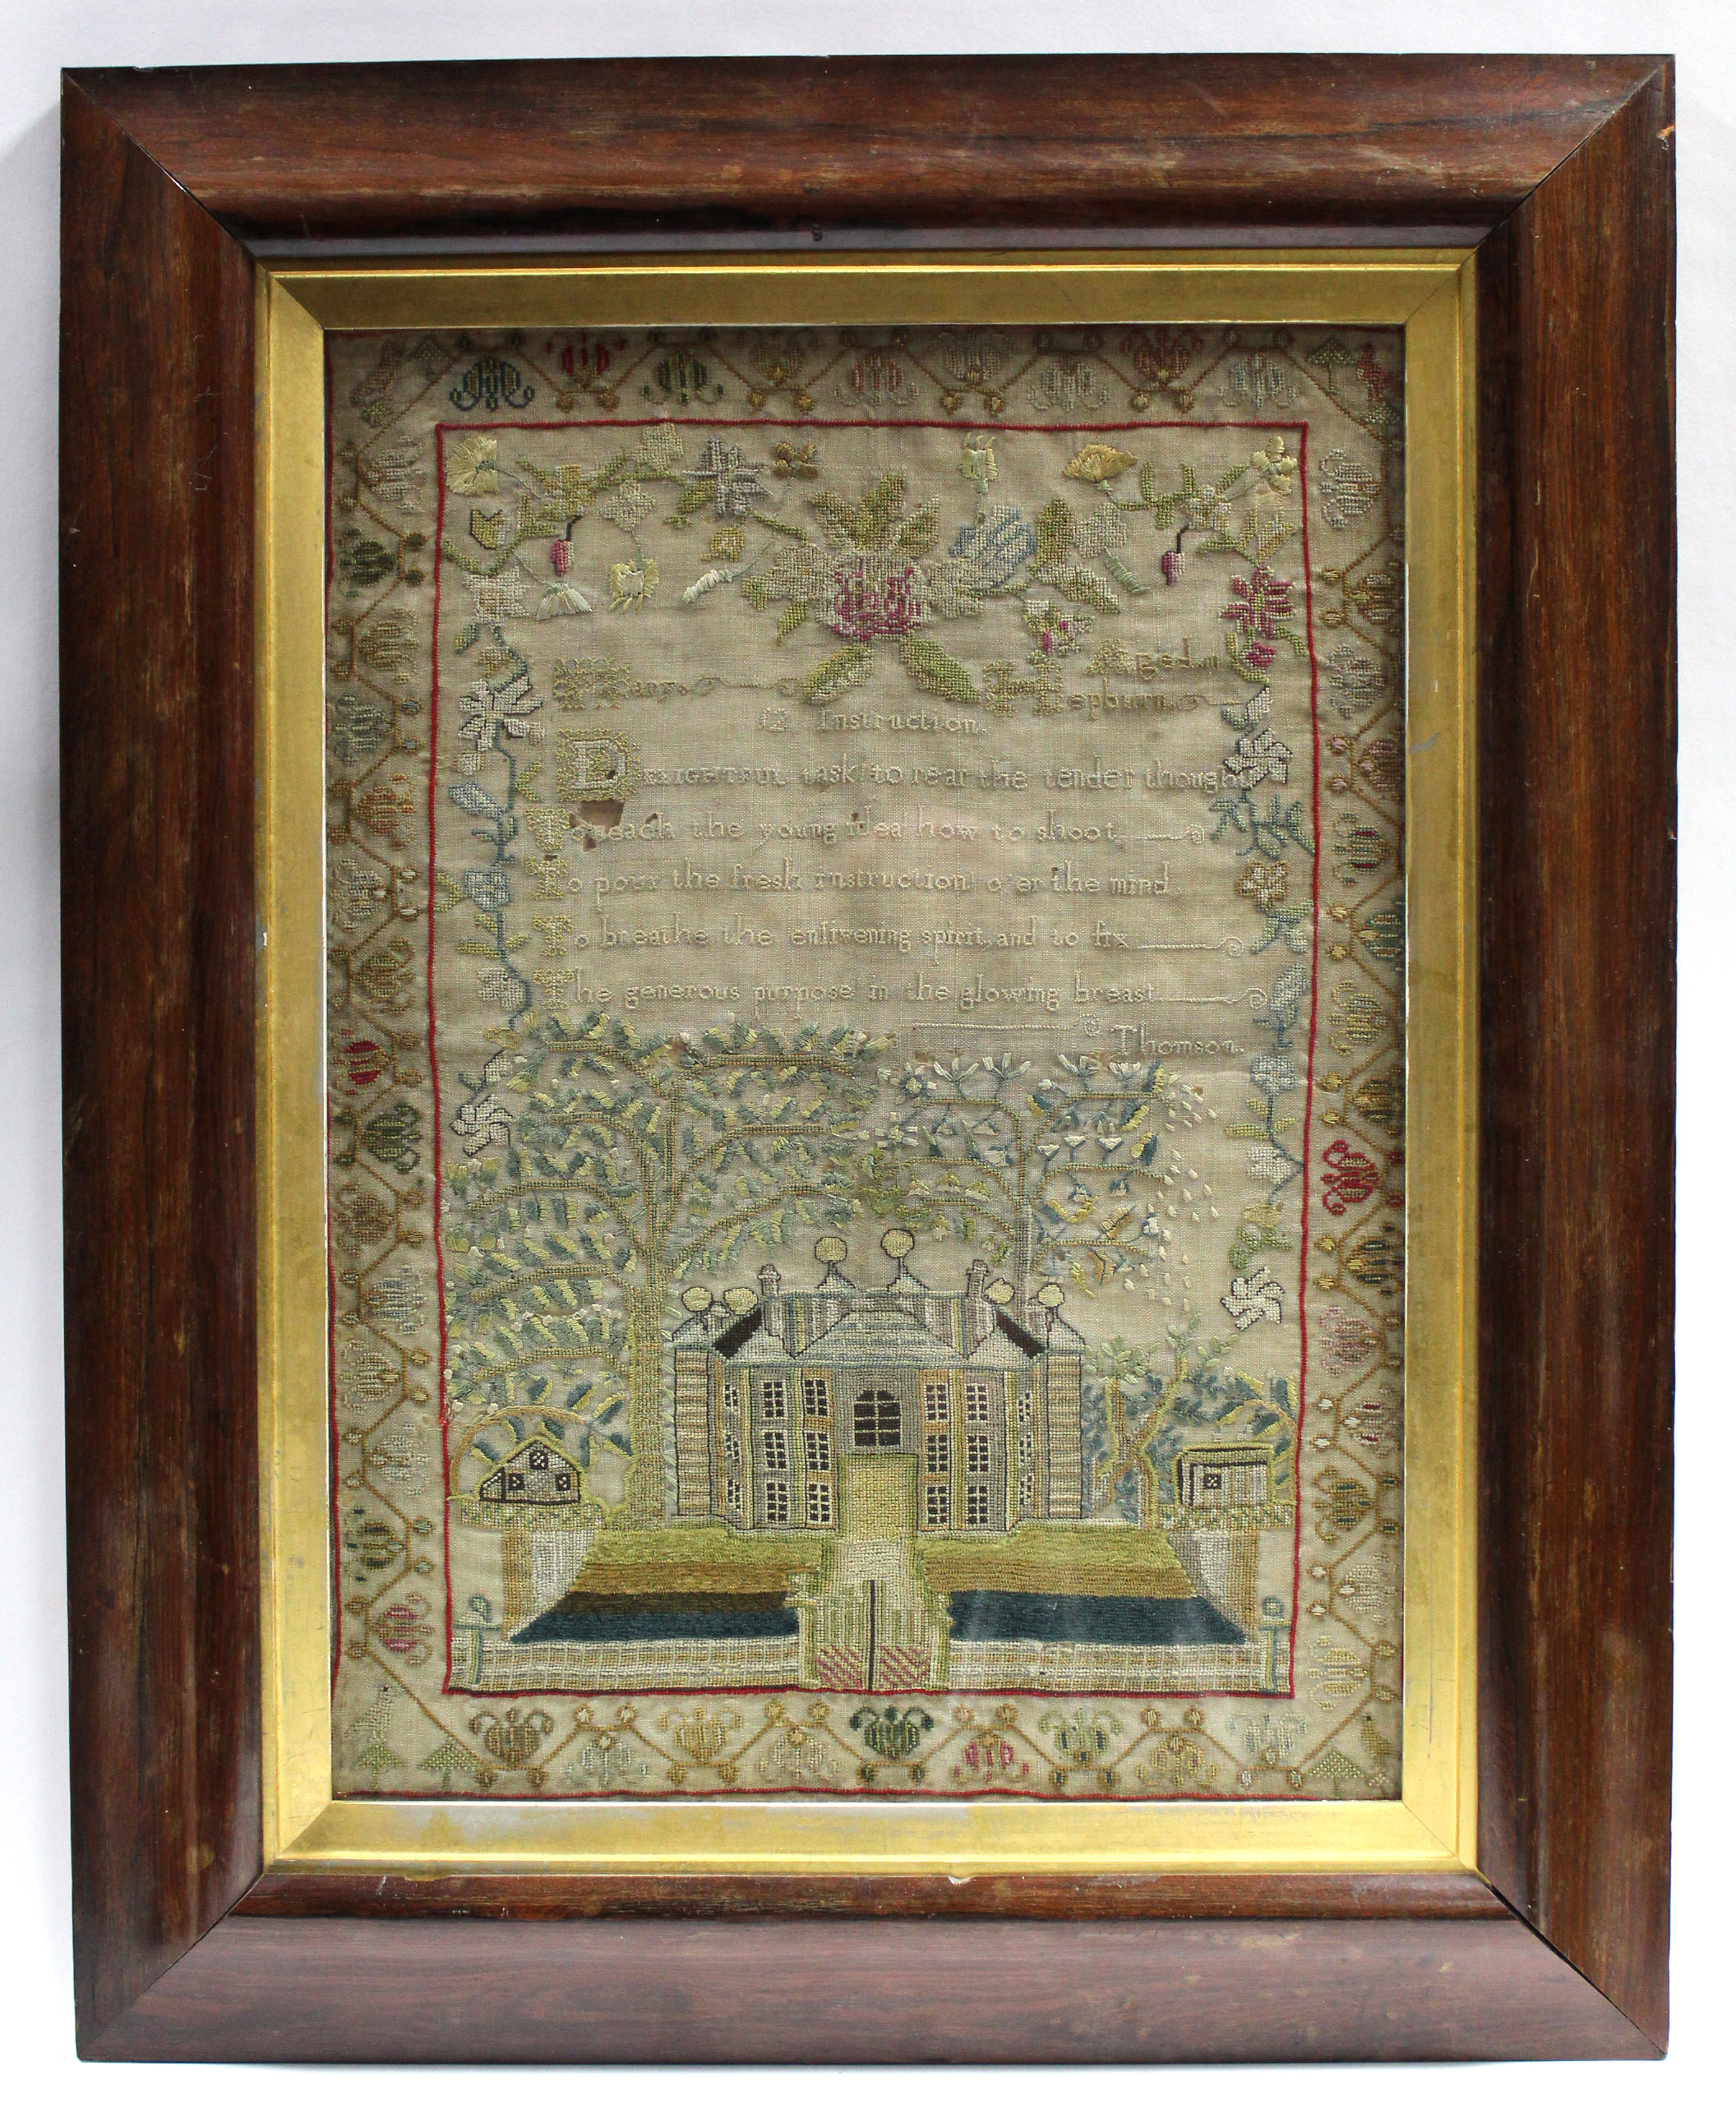 A George III needlework sampler by Mary Hepburn, aged 10, undated, with country house amongst trees,